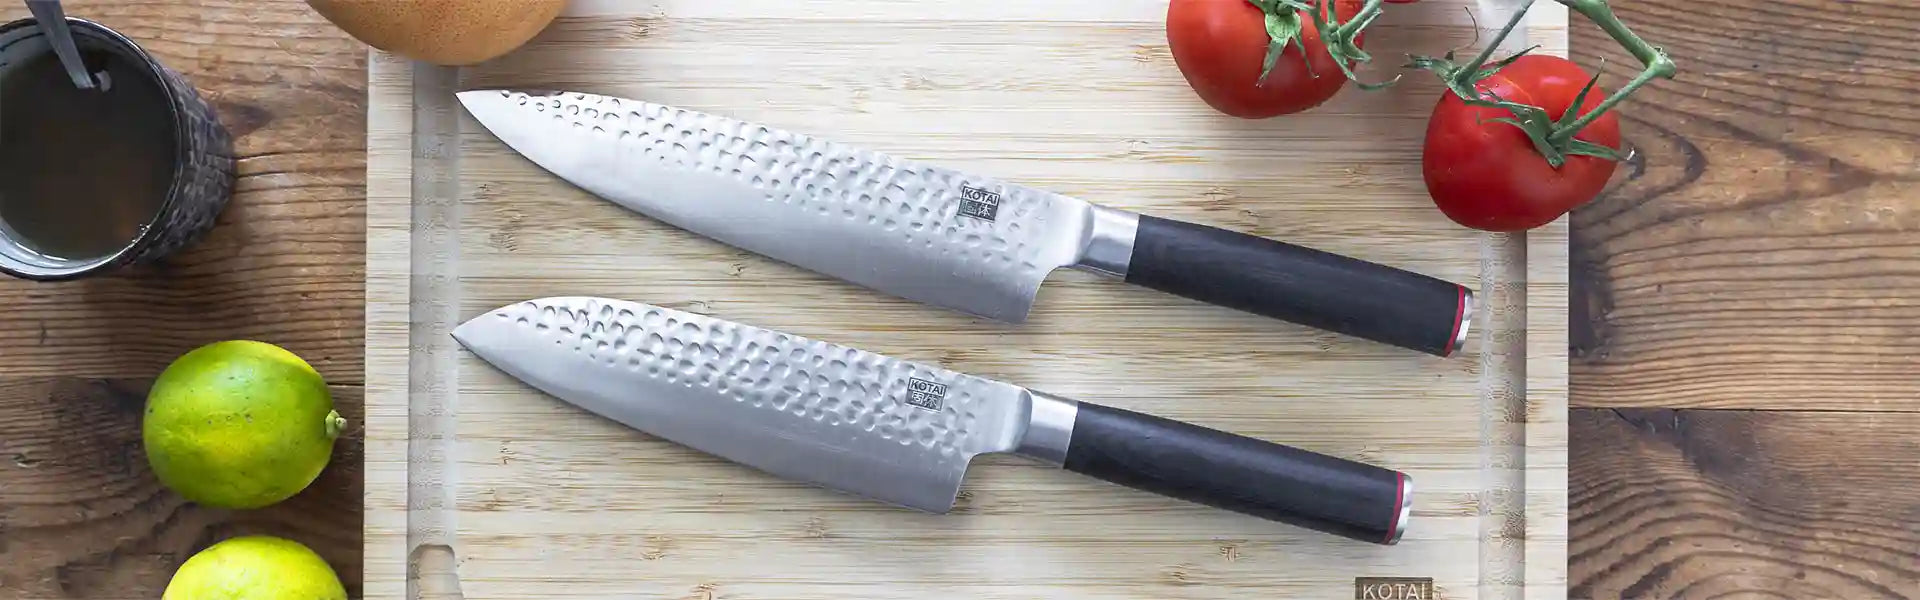 Chef's knife vs santoku. What are the differences?